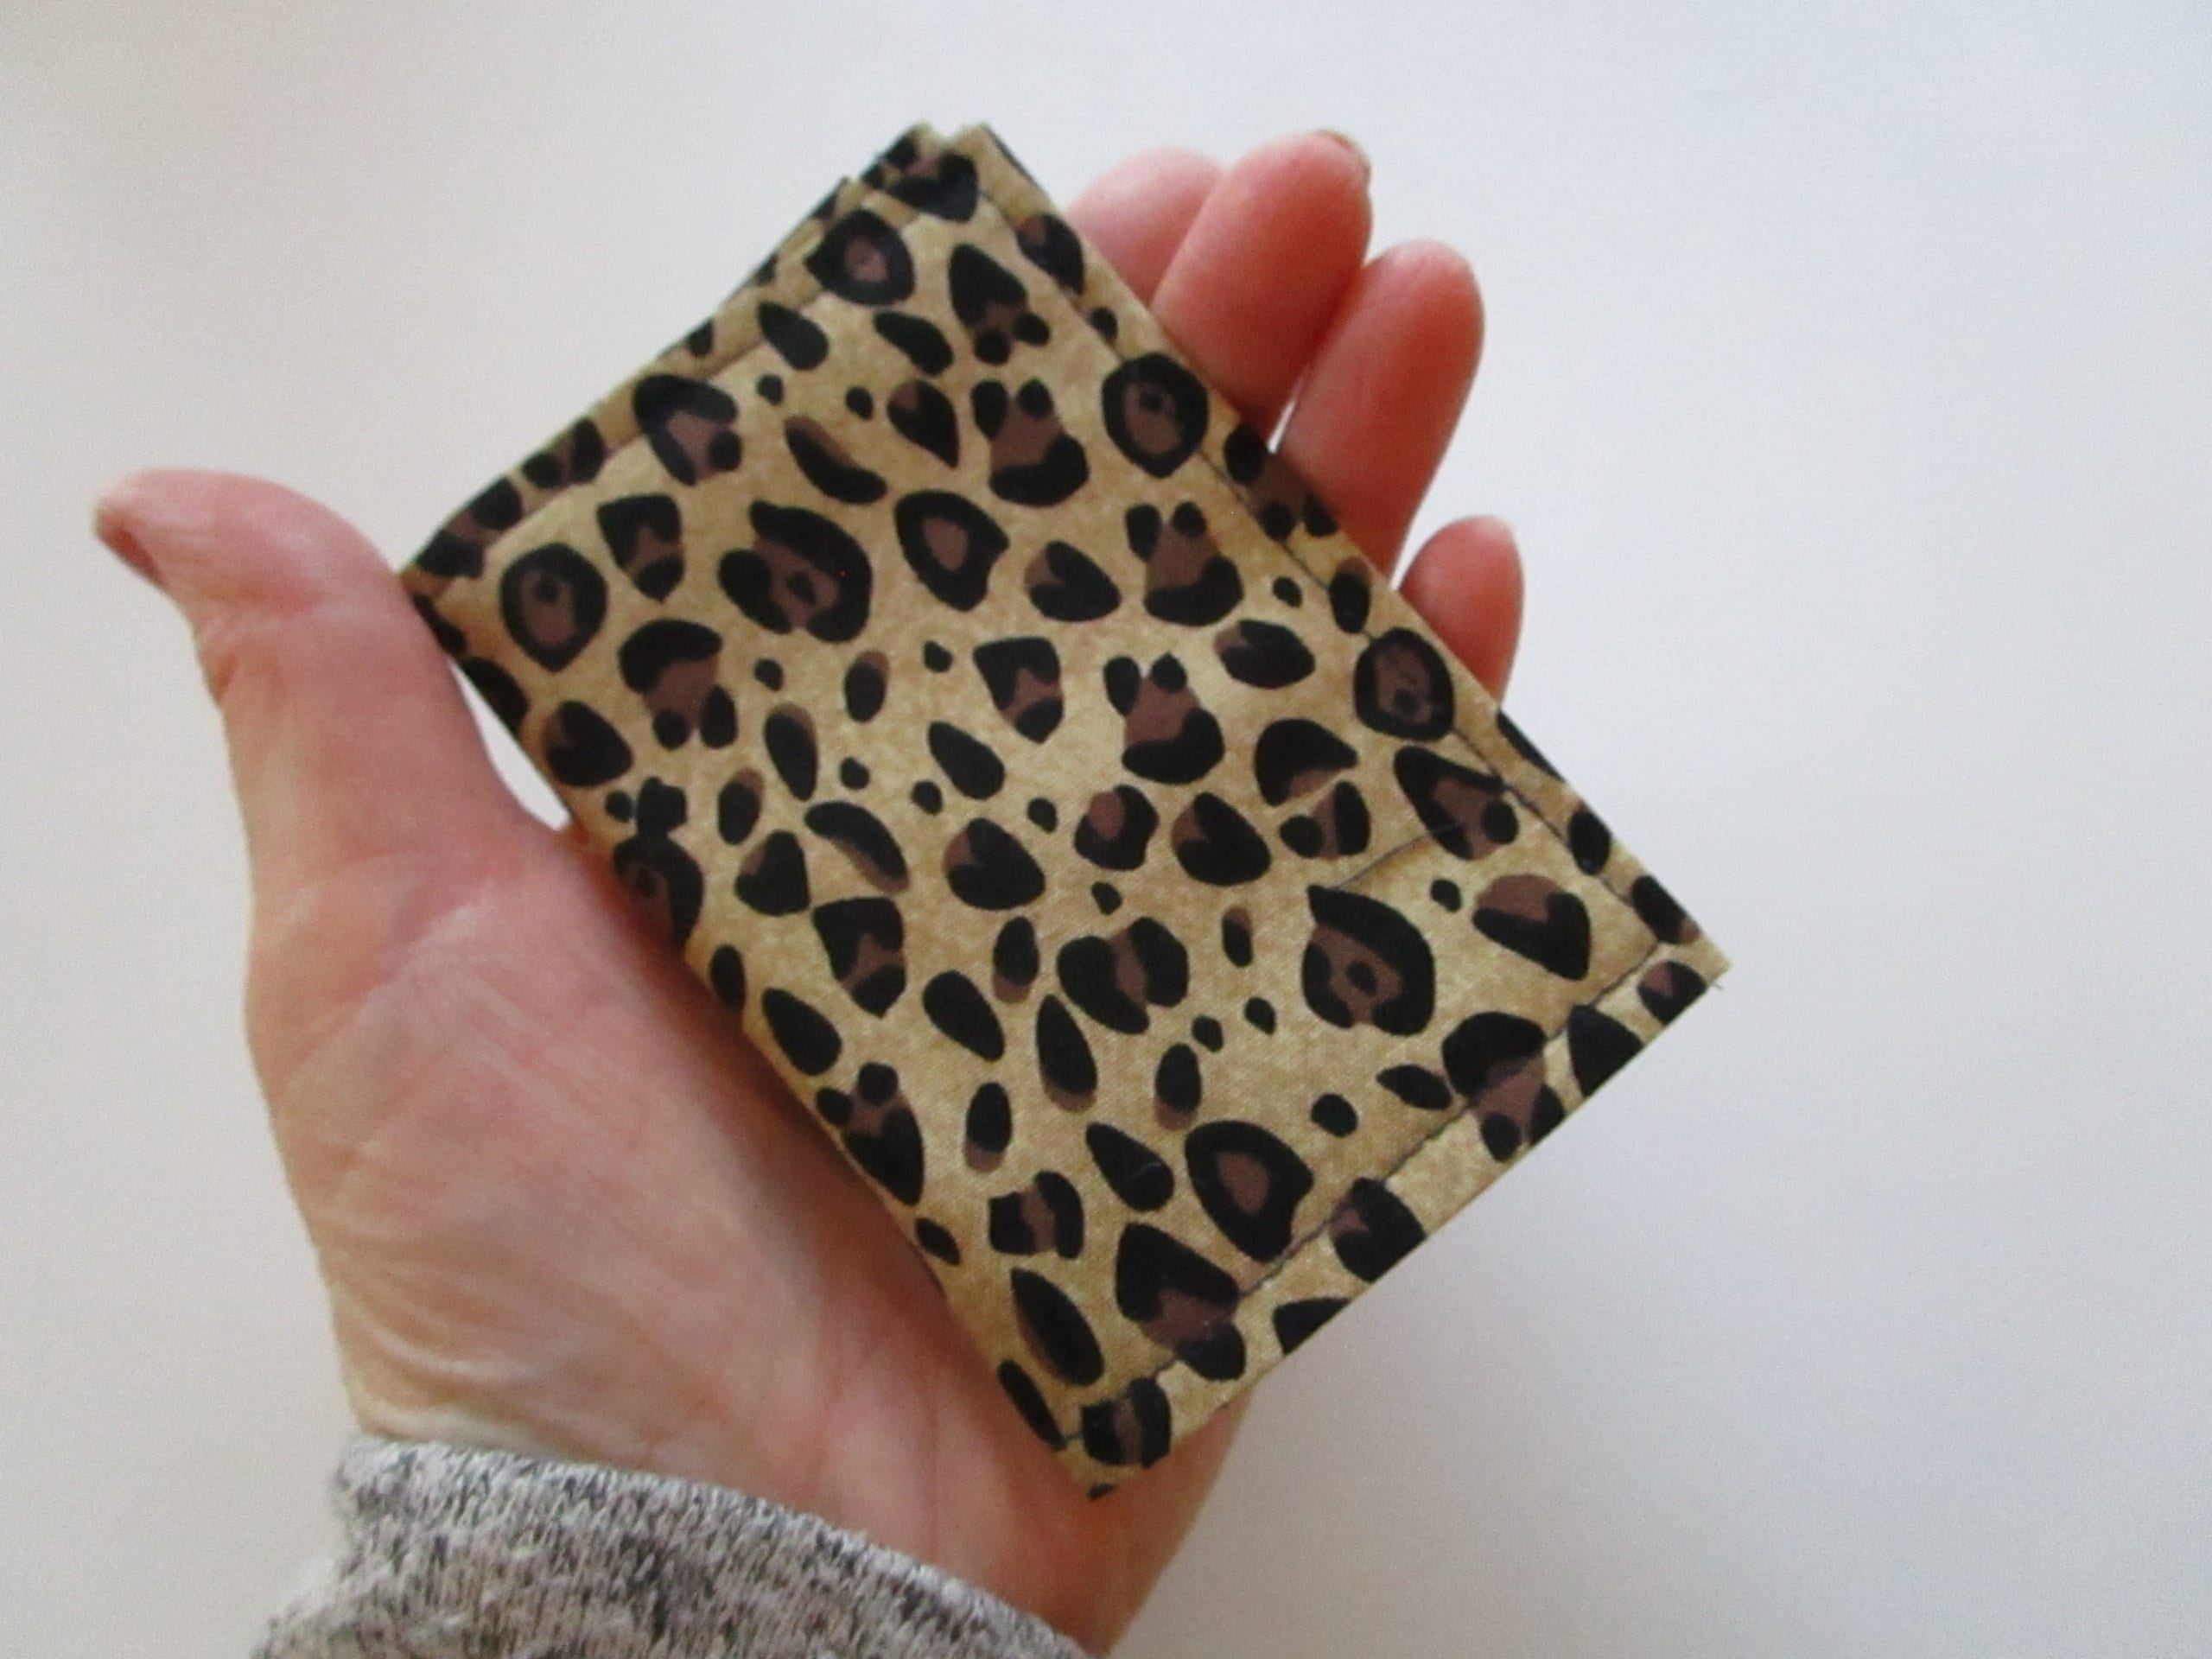 Leopard Print Small Wallet Push Lock Design Credit Card Small Purse ID Window Zipper Women Wallet Portable,Money,Cash White-Collar Workers,For Female